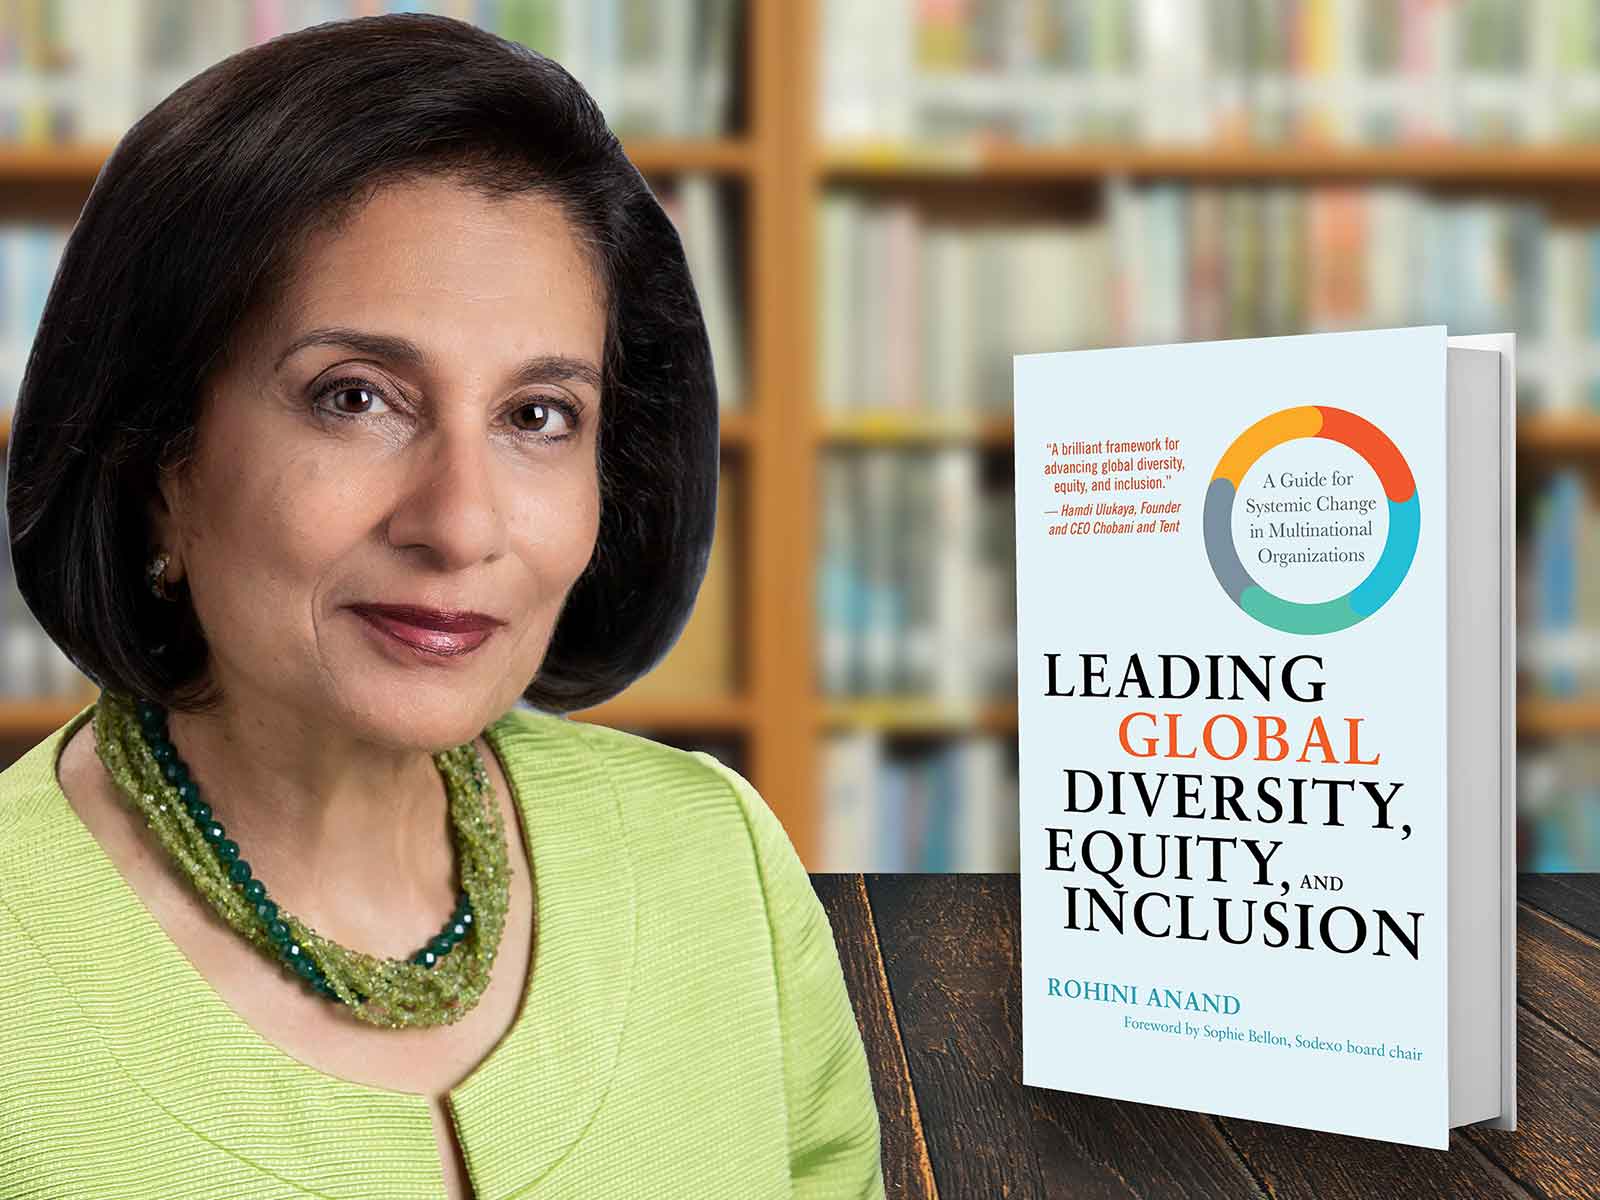 Leading Global Diversity, Equity, and Inclusion: A Guide for Systemic Change in Multinational Organizations by Rohini Anand